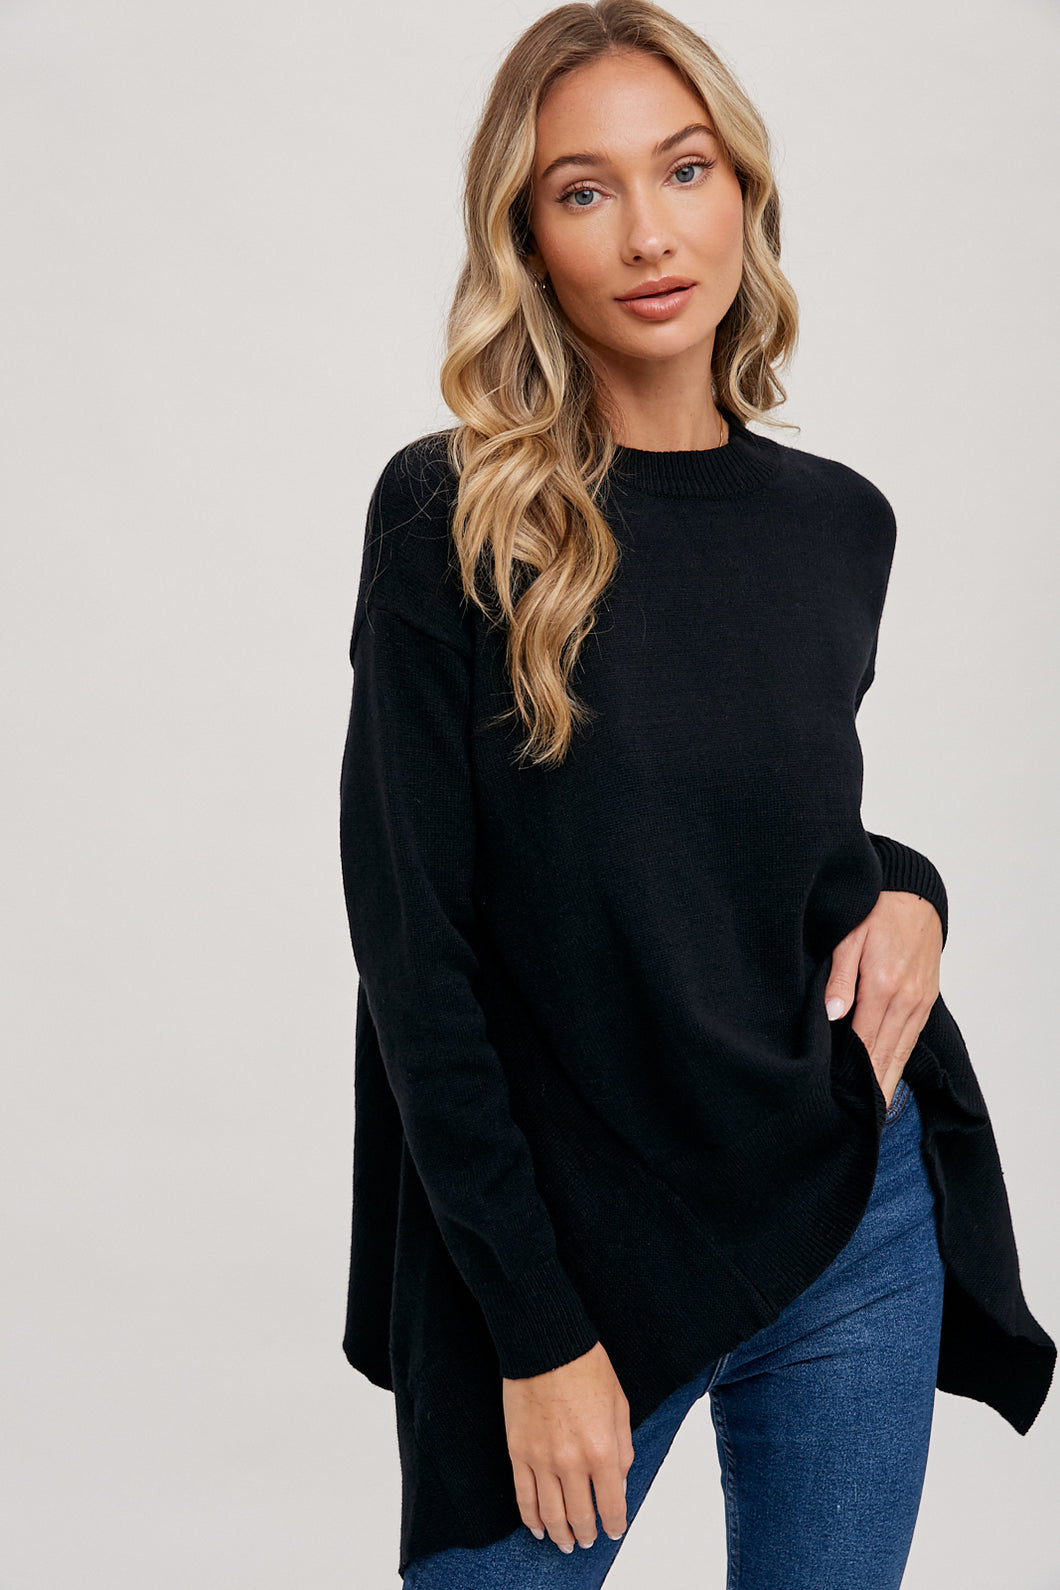 The Bella Throw Over Sweater in Black